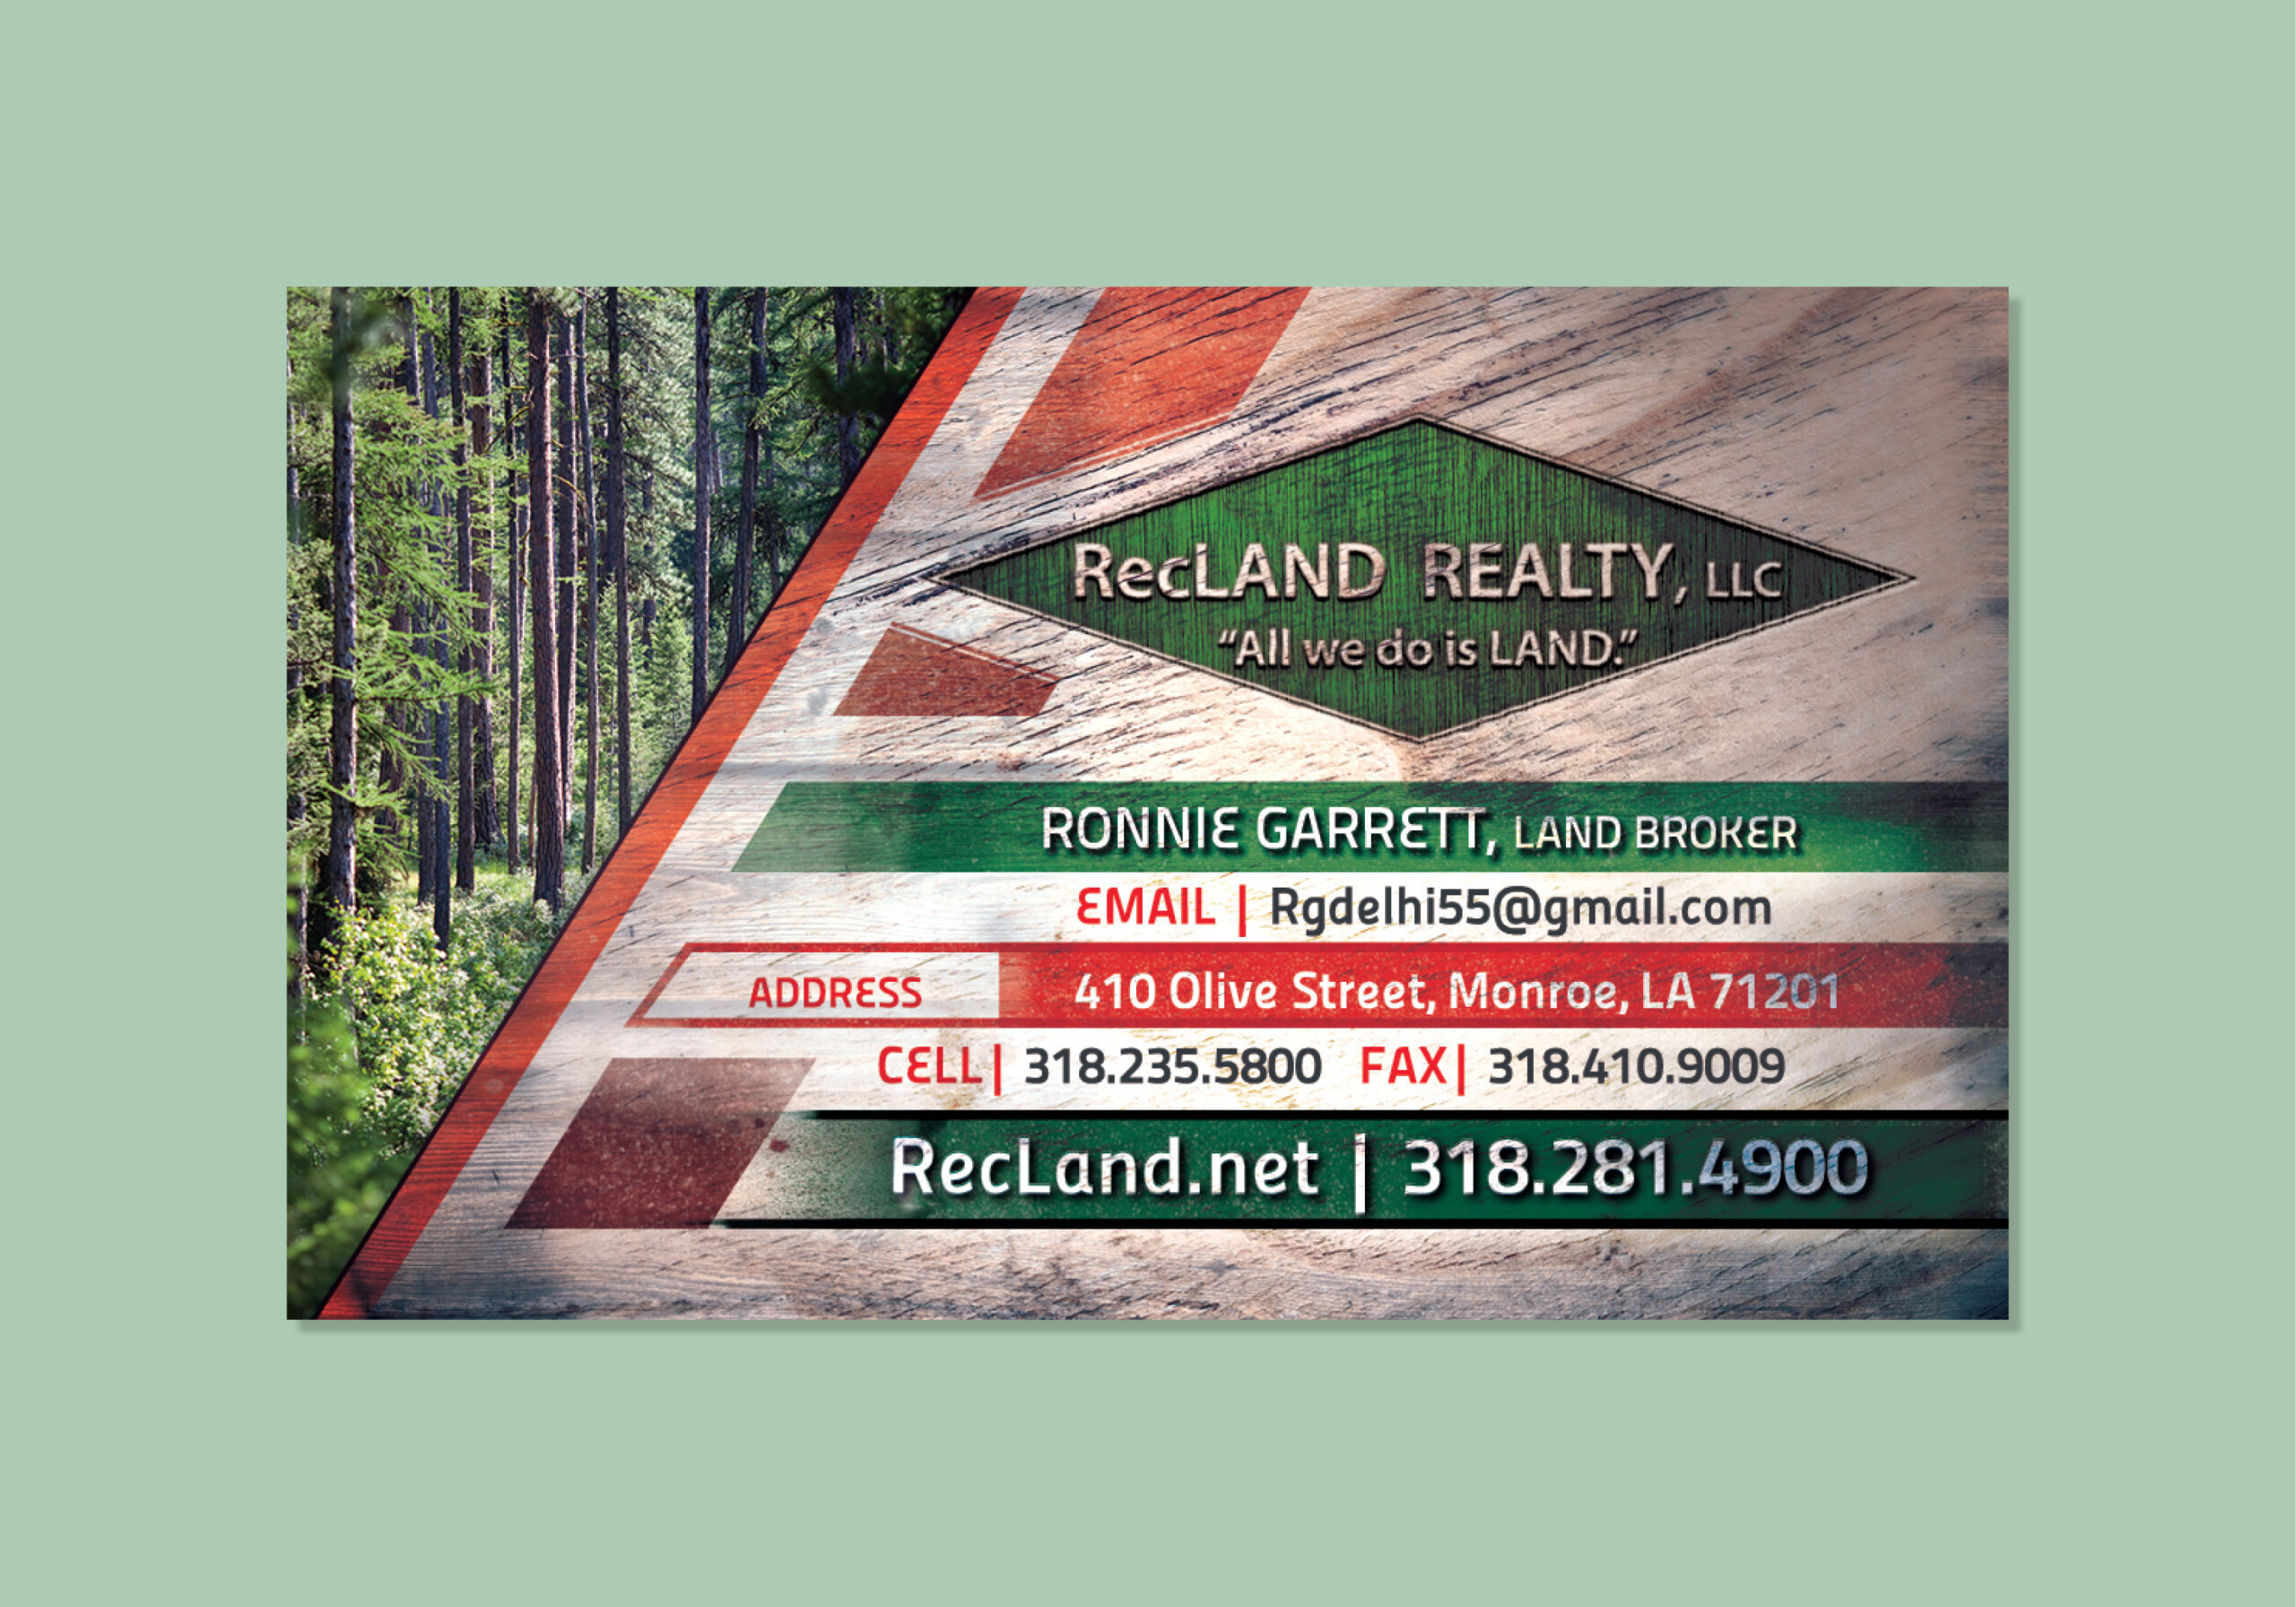 Recland-business-card